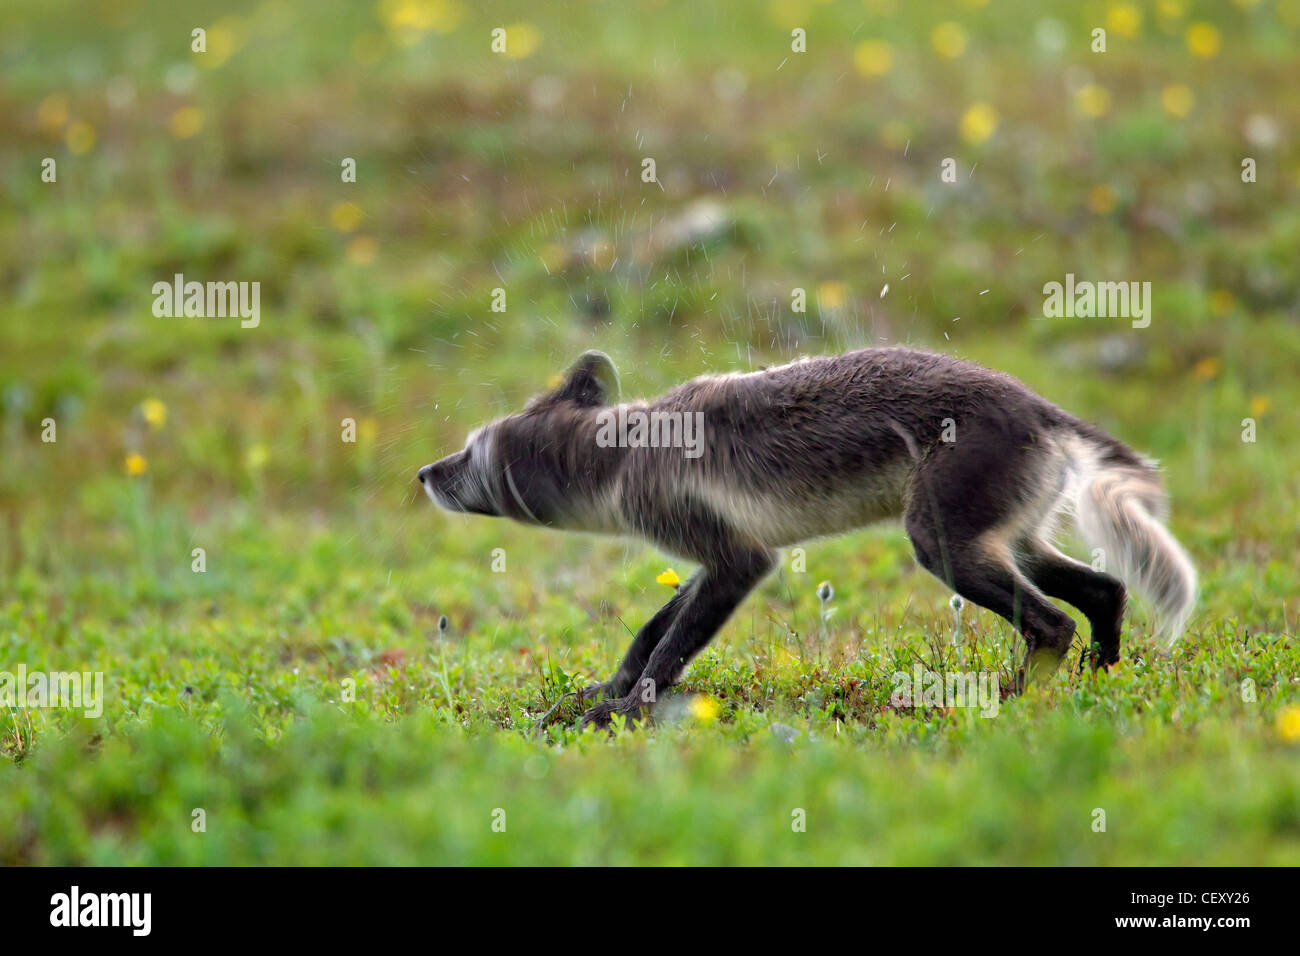 Wet Arctic fox (Vulpes lagopus / Alopex lagopus) shaking water off fur to dry after rain on the tundra in summer, Lapland Sweden Stock Photo